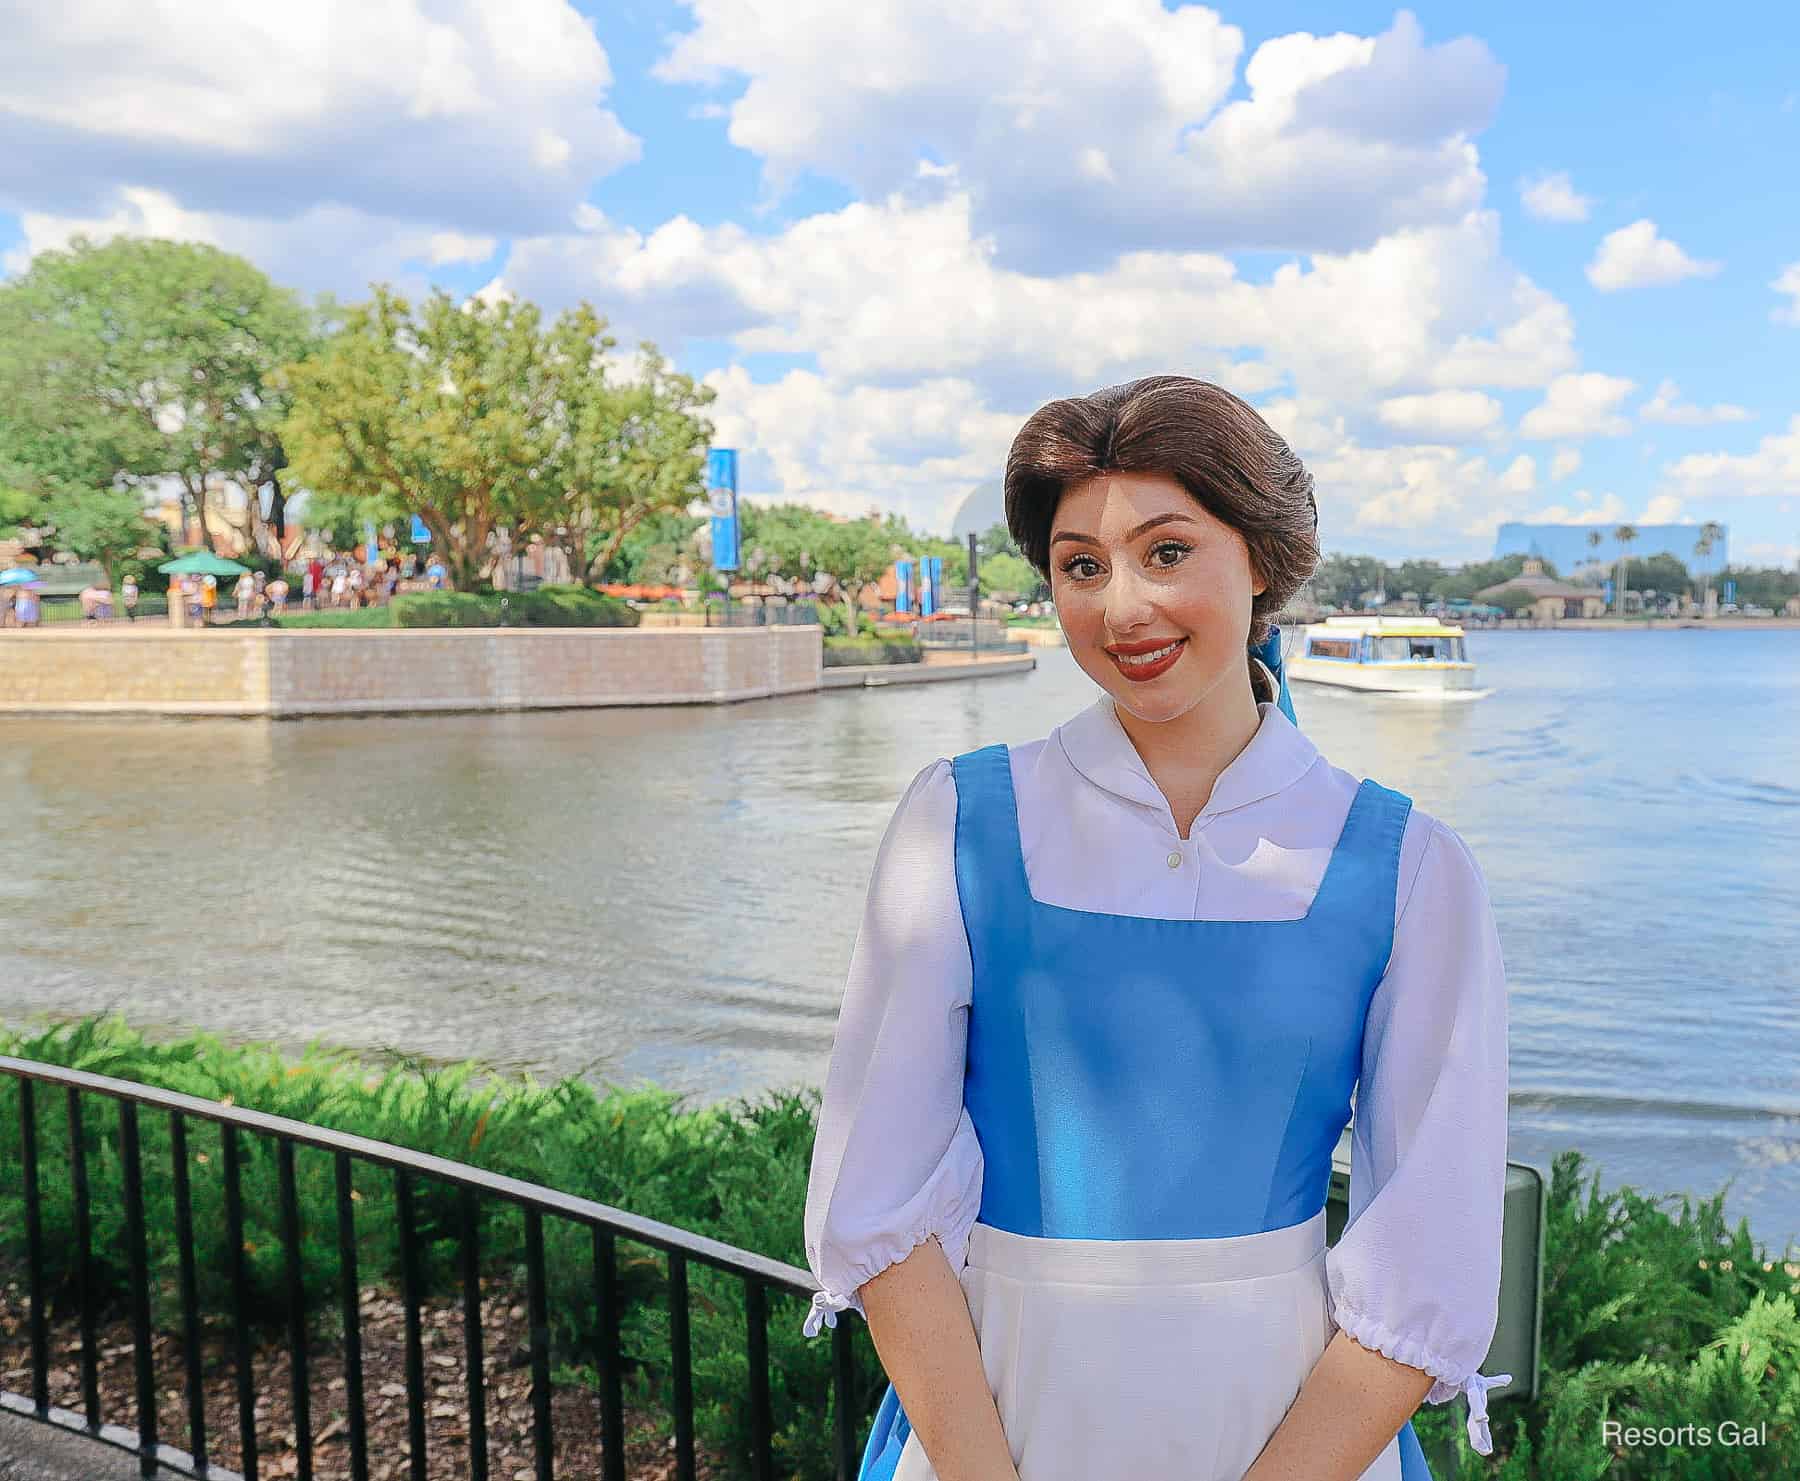 Belle poses in her village dress at Epcot. 